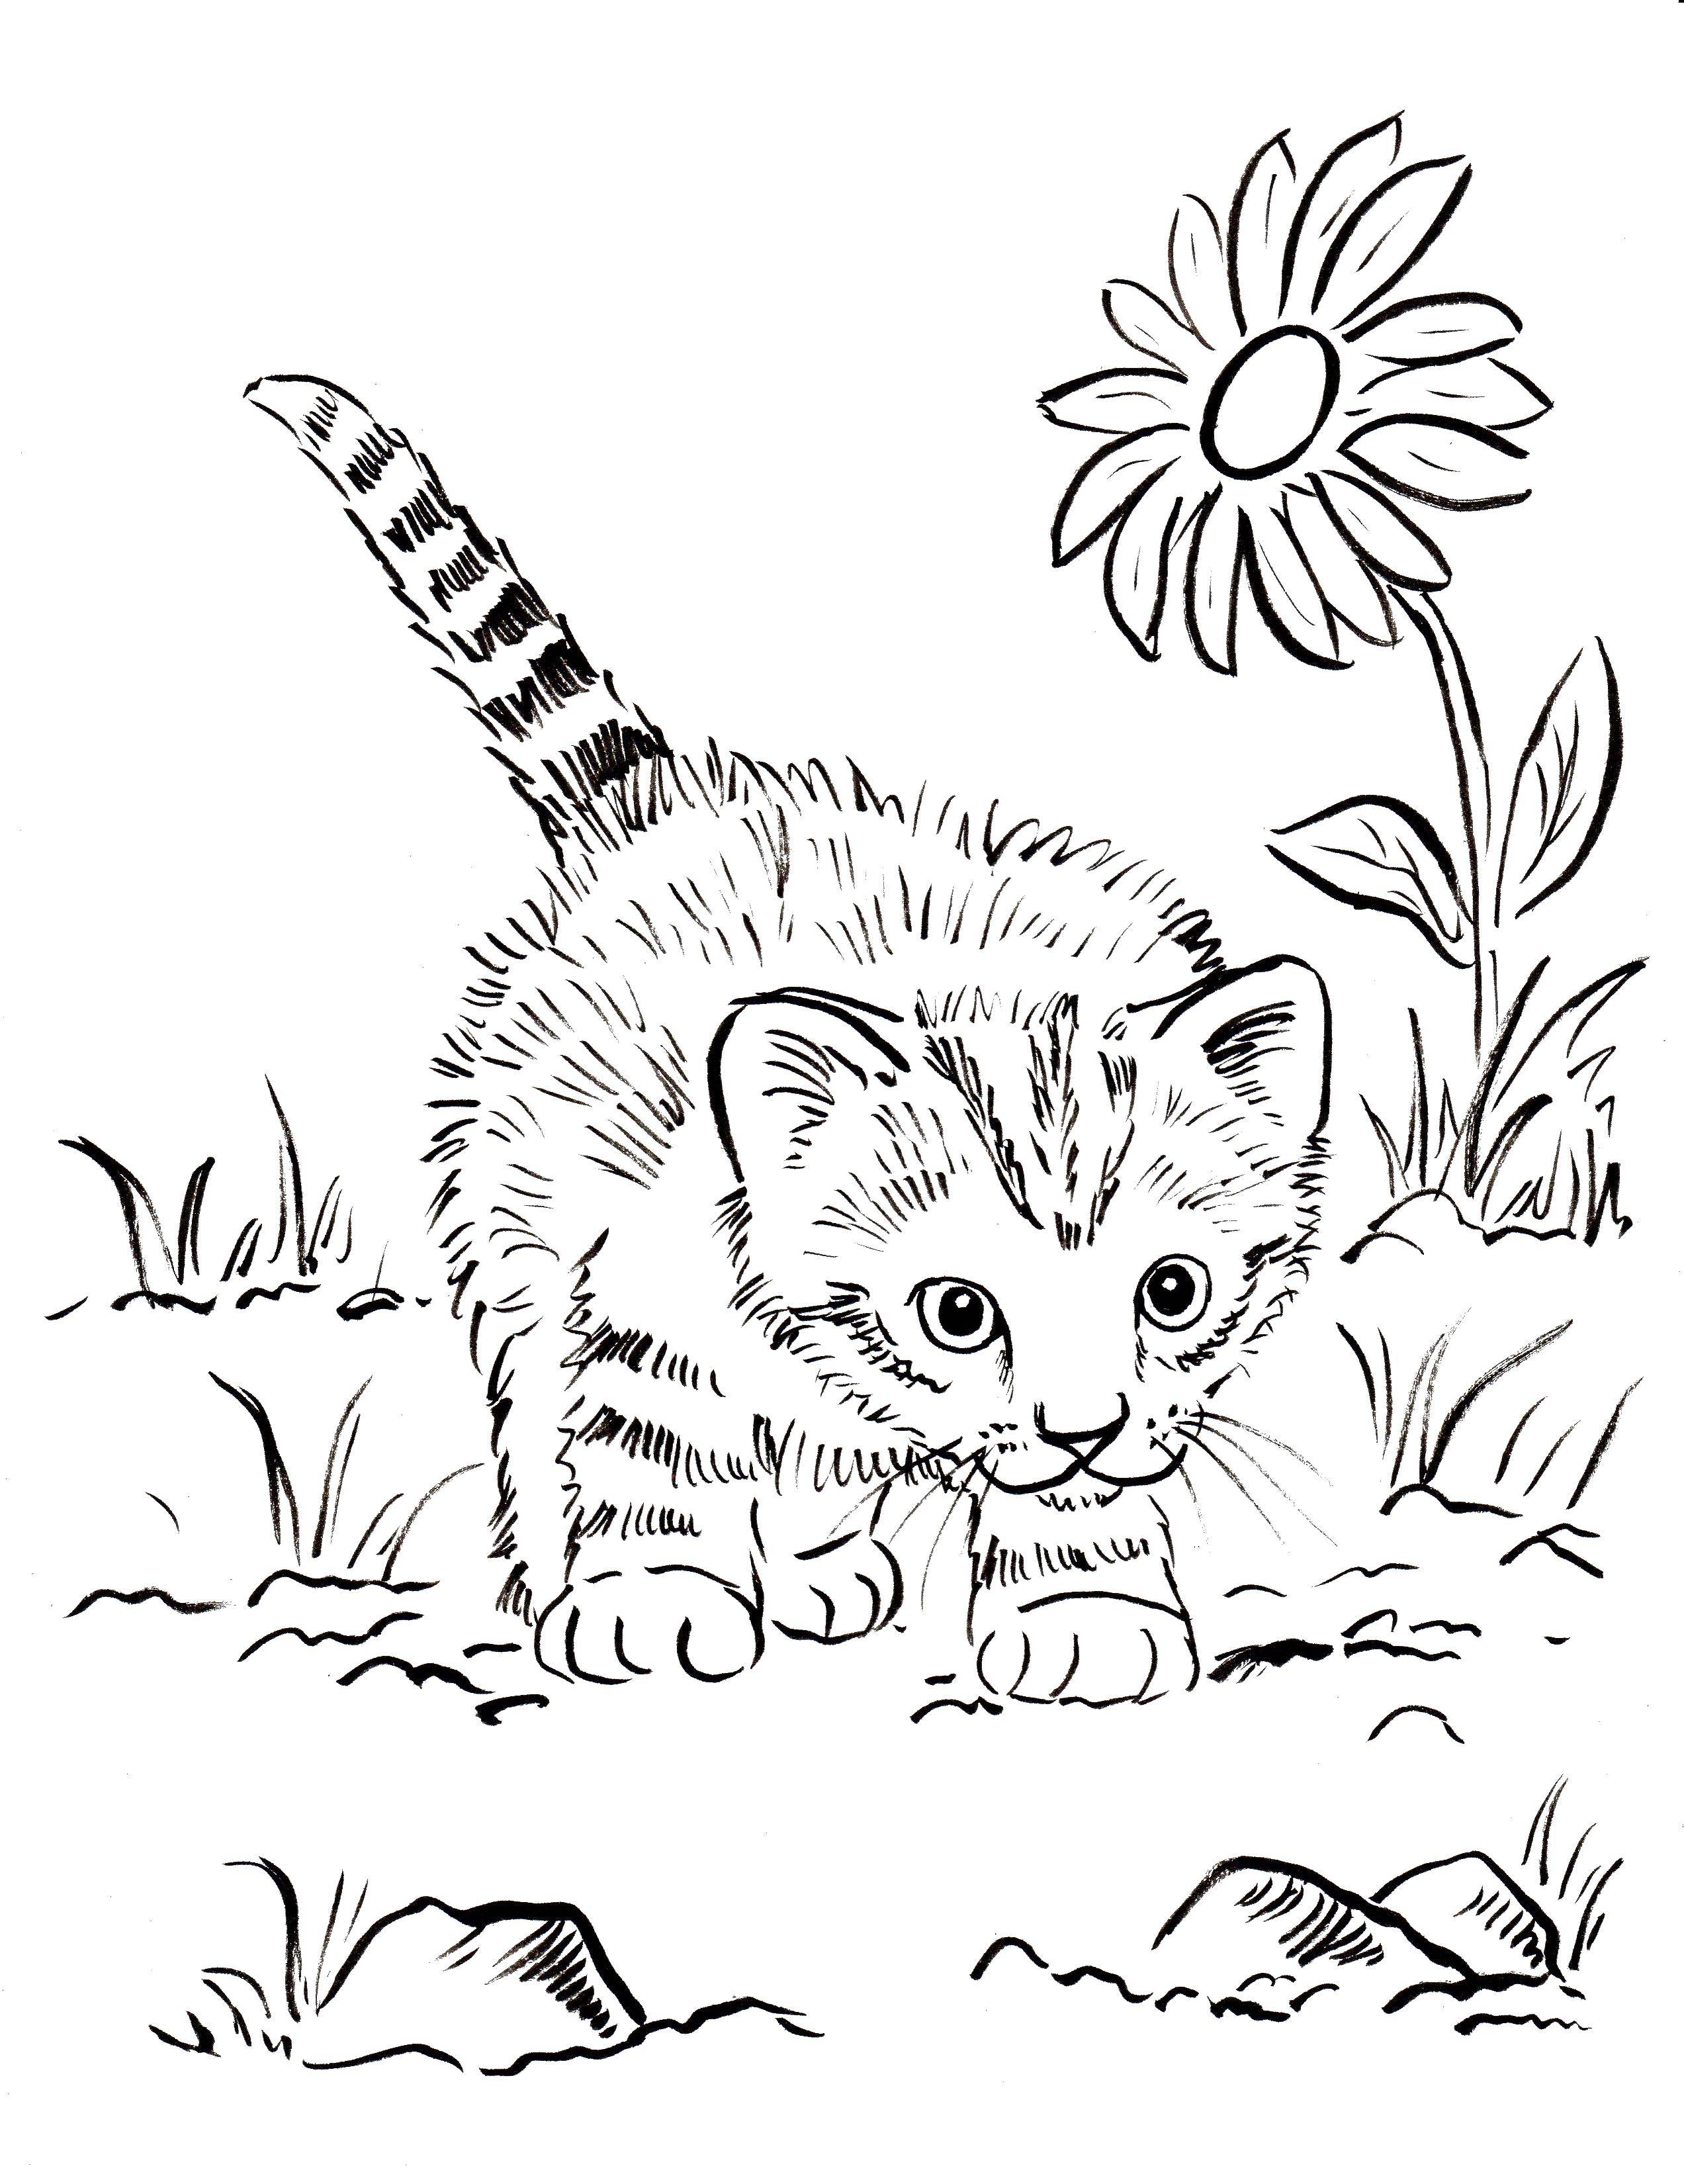 Coloring Kitten in the grass. Category Cats and kittens. Tags:  animals, kitten, cat, nature.